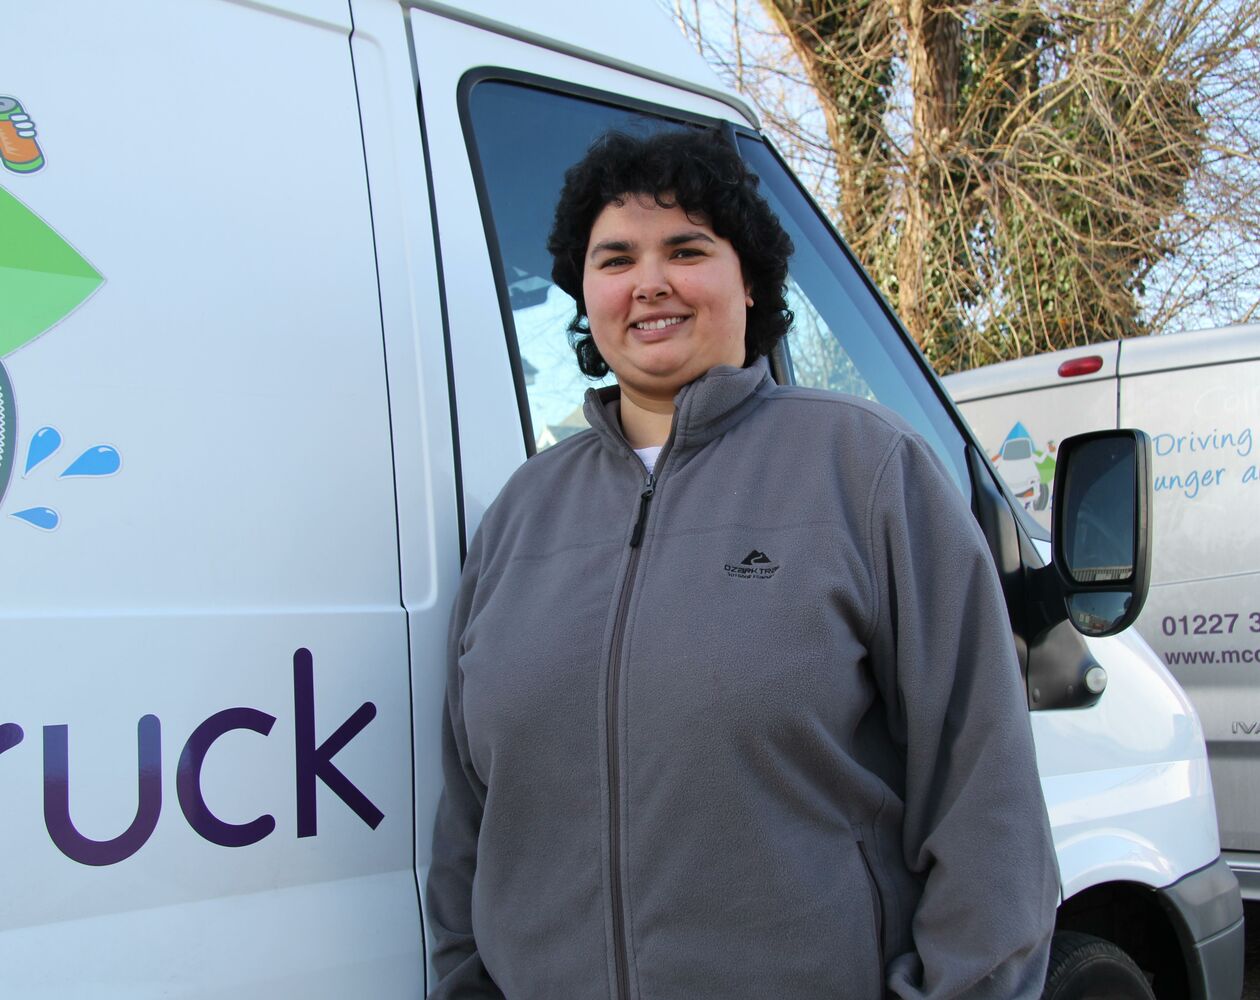 PWS Kim Tuck by Truck